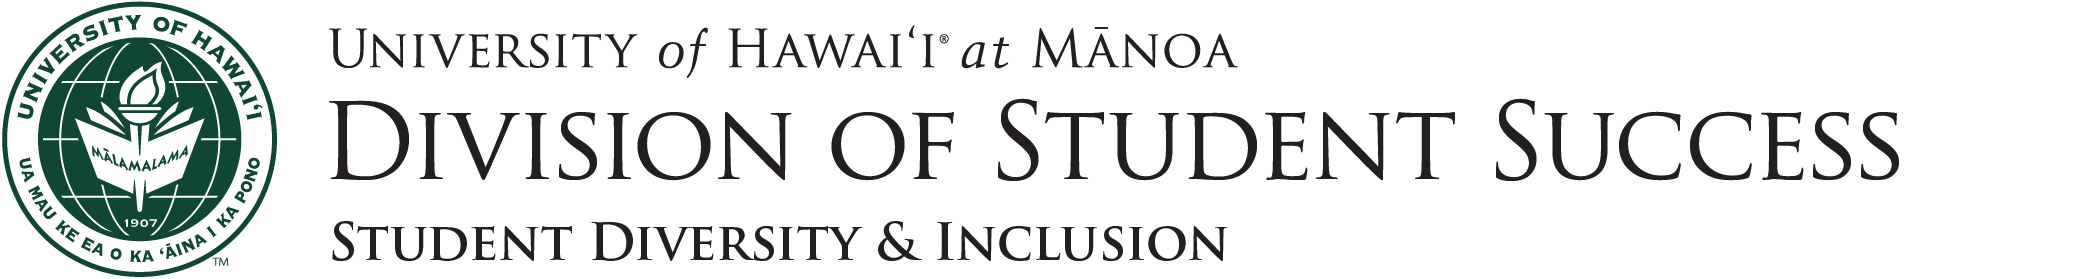 Student Diversity & Inclusion - Division of Student Success logo